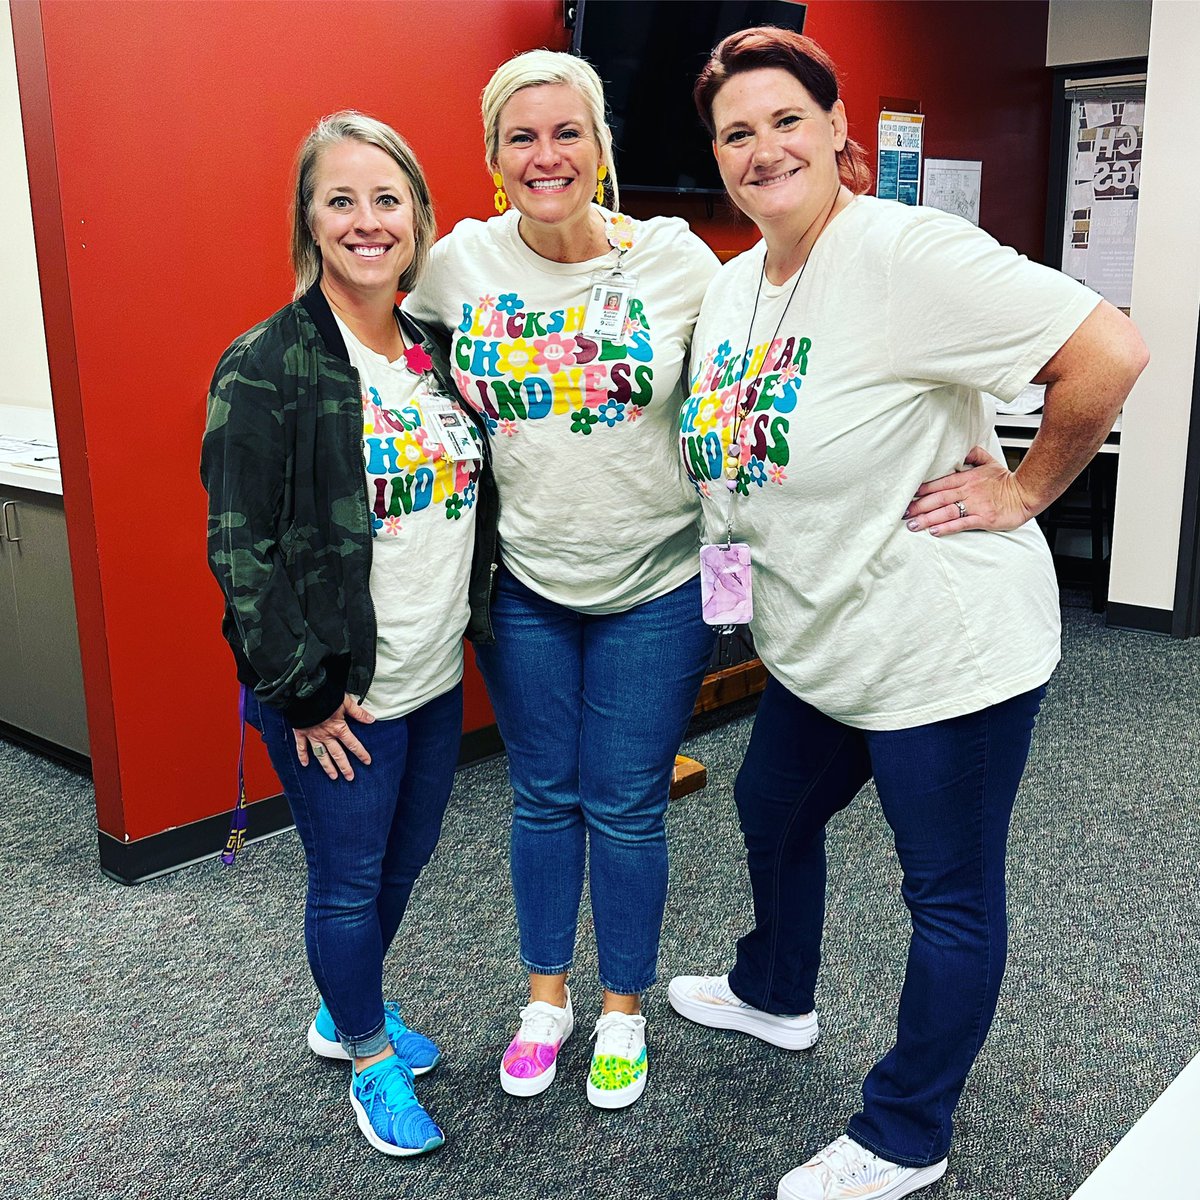 First full week of school kept us moving and grooving at Blackshear! Grateful for these two for jumping right into all the fun and loving our buffaloes! #BlackshearChoosesKindness #PeaceLoveBuffaloes #lovemyteam